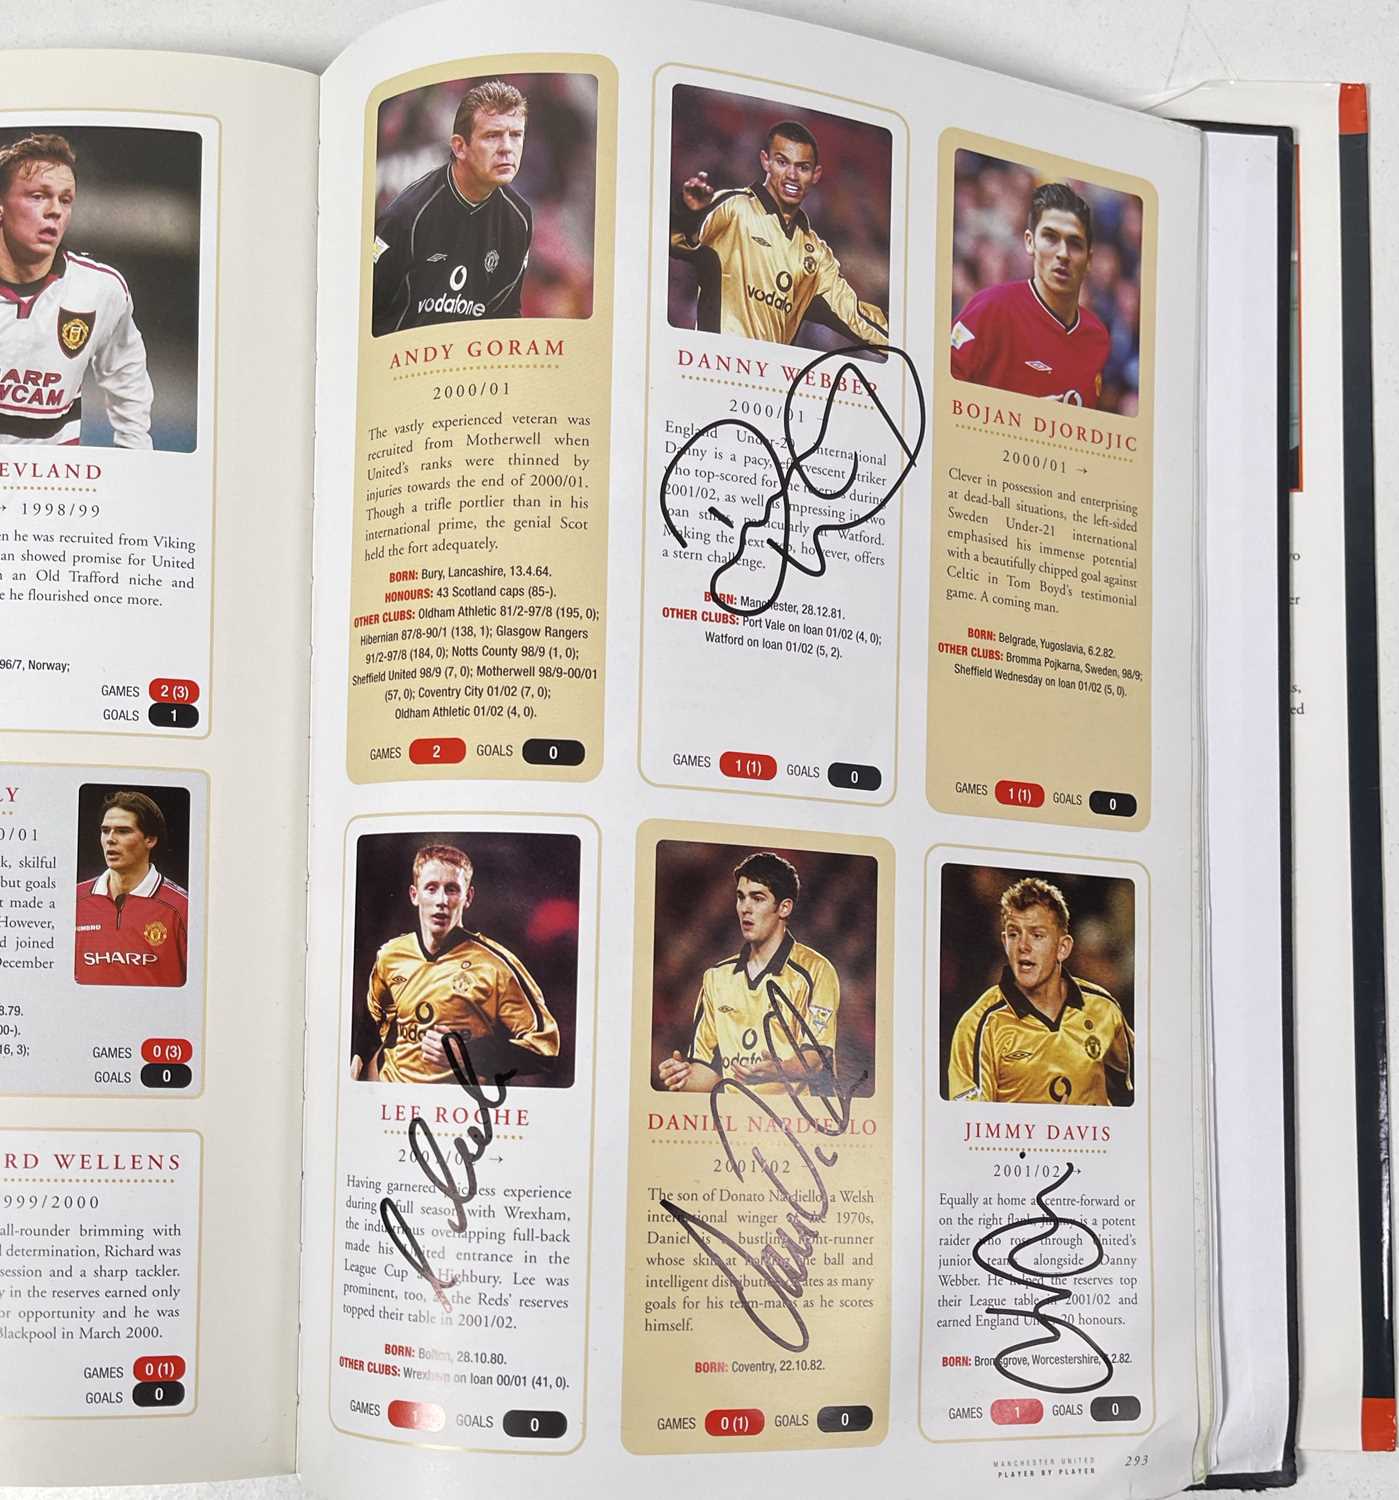 FOOTBALL MEMORABILIA - MANCHESTER UNITED MULTI SIGNED 'PLAYER BY PLAYER' BOOK. - Image 49 of 50